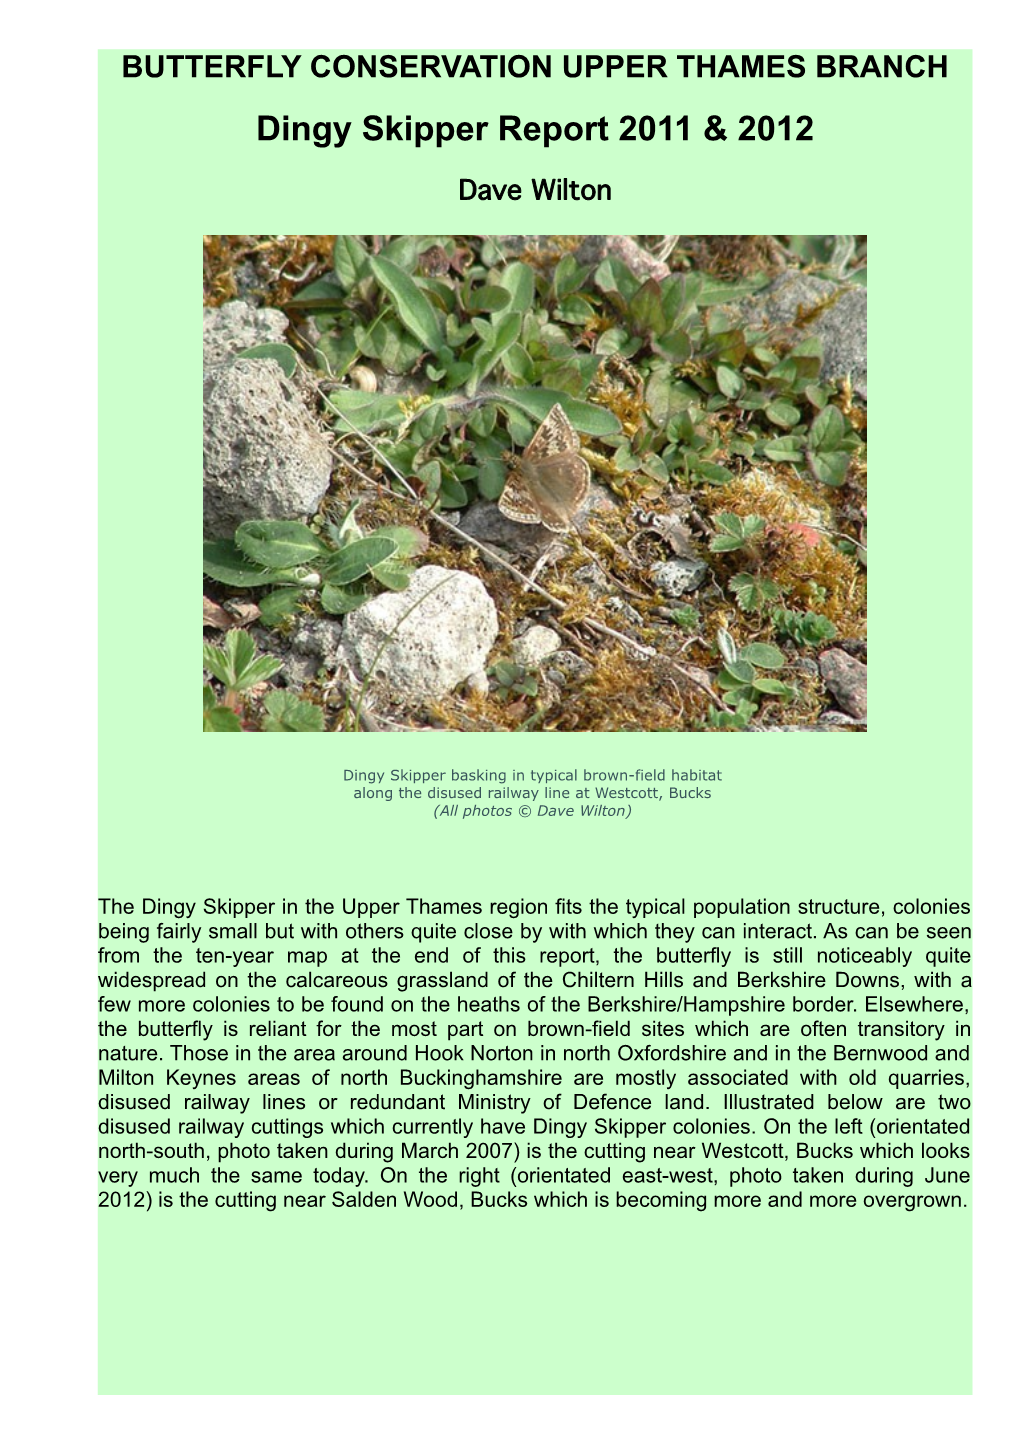 BUTTERFLY CONSERVATION UPPER THAMES BRANCH Dingy Skipper Report 2011 & 2012